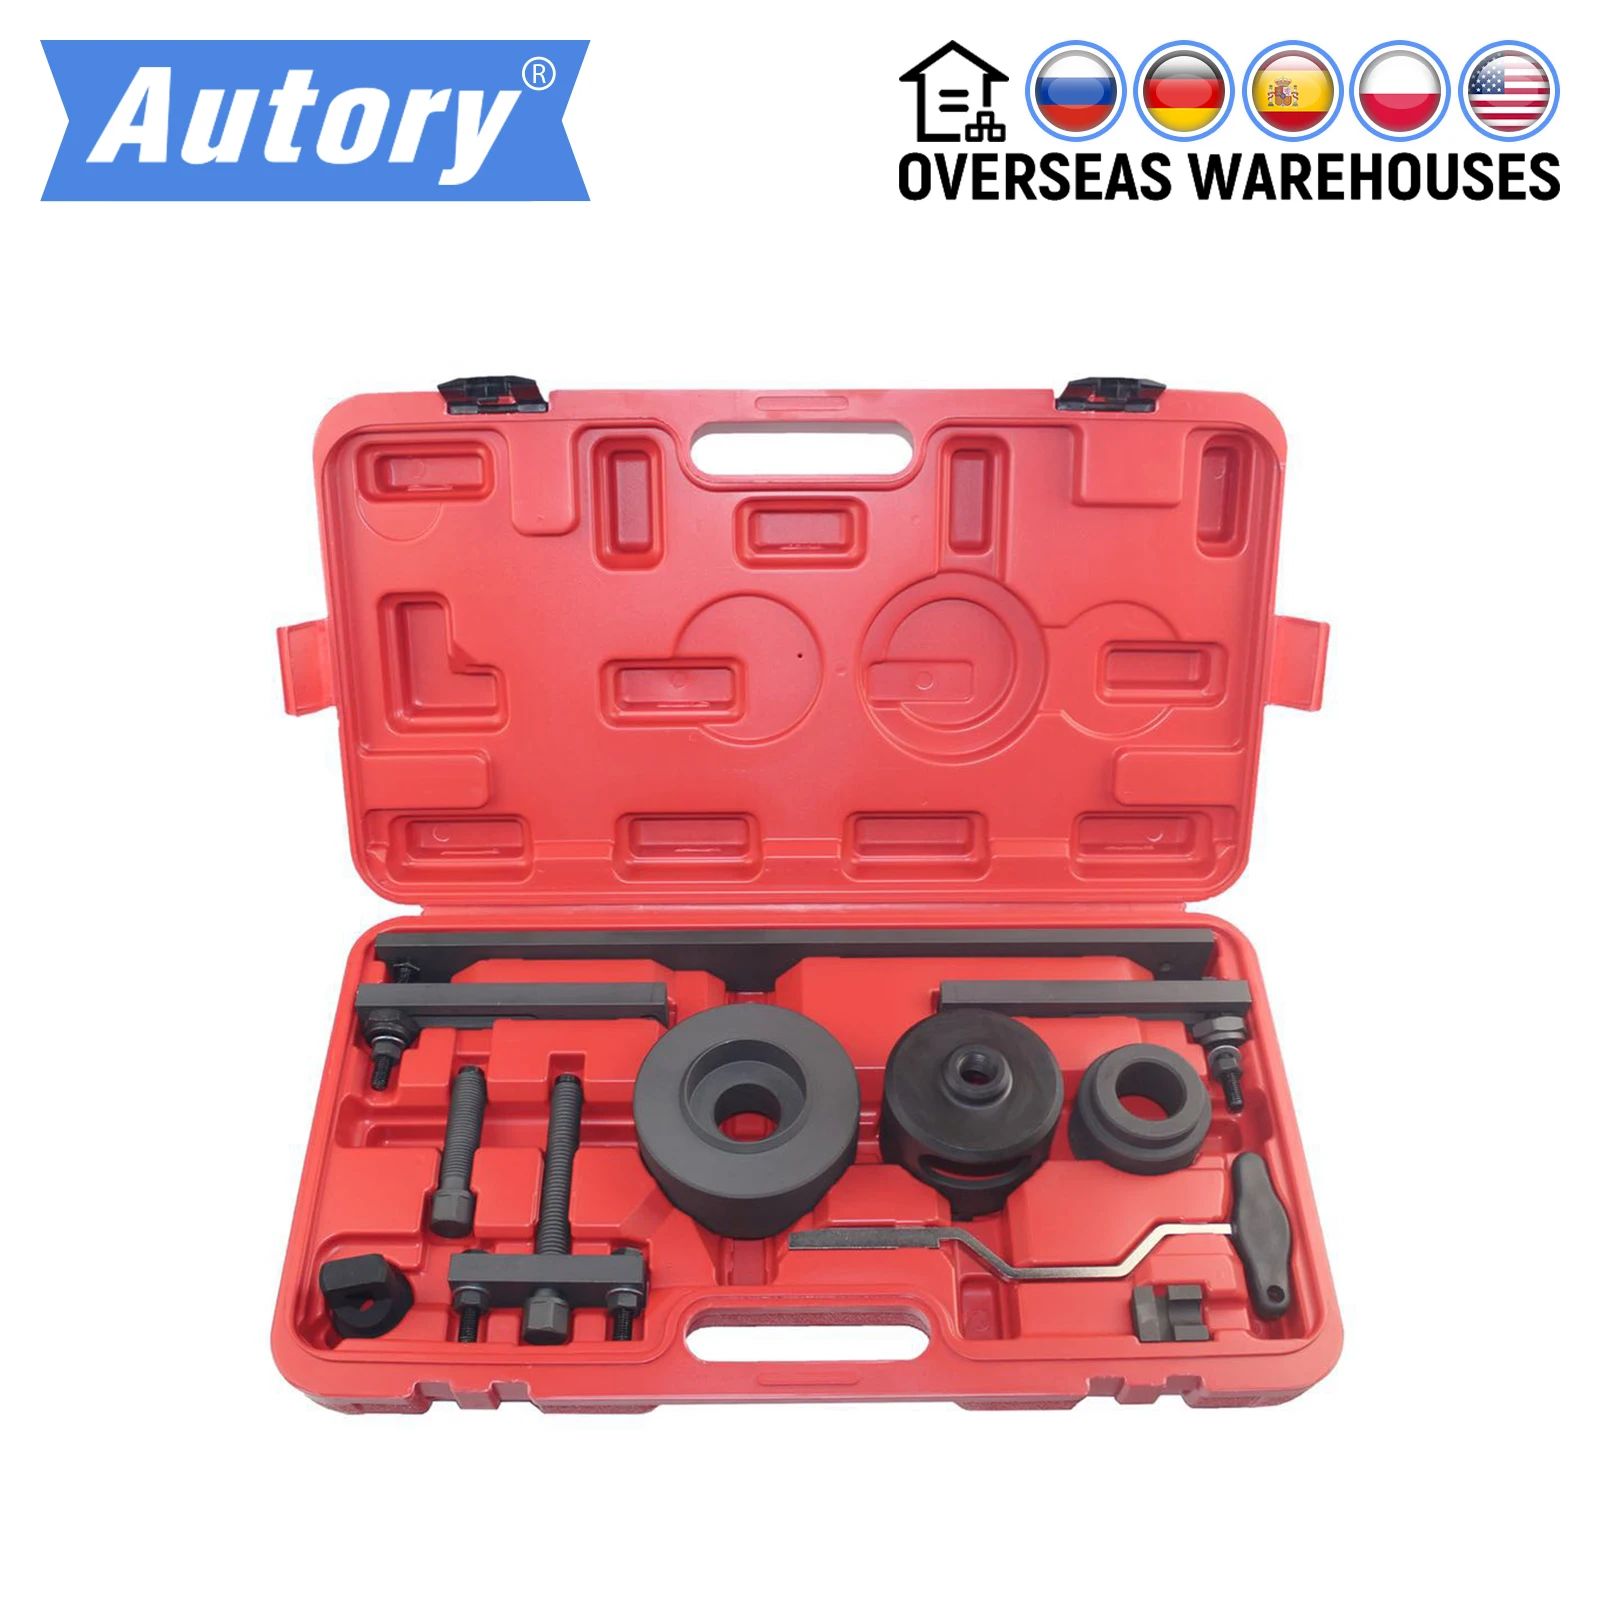 

Dual Clutch DSG Gearbox Installer Remover Tool Adjust Clutch Engagement Bearings T10466 for VAG VW Golf Audi A3 on 6 7 Speed